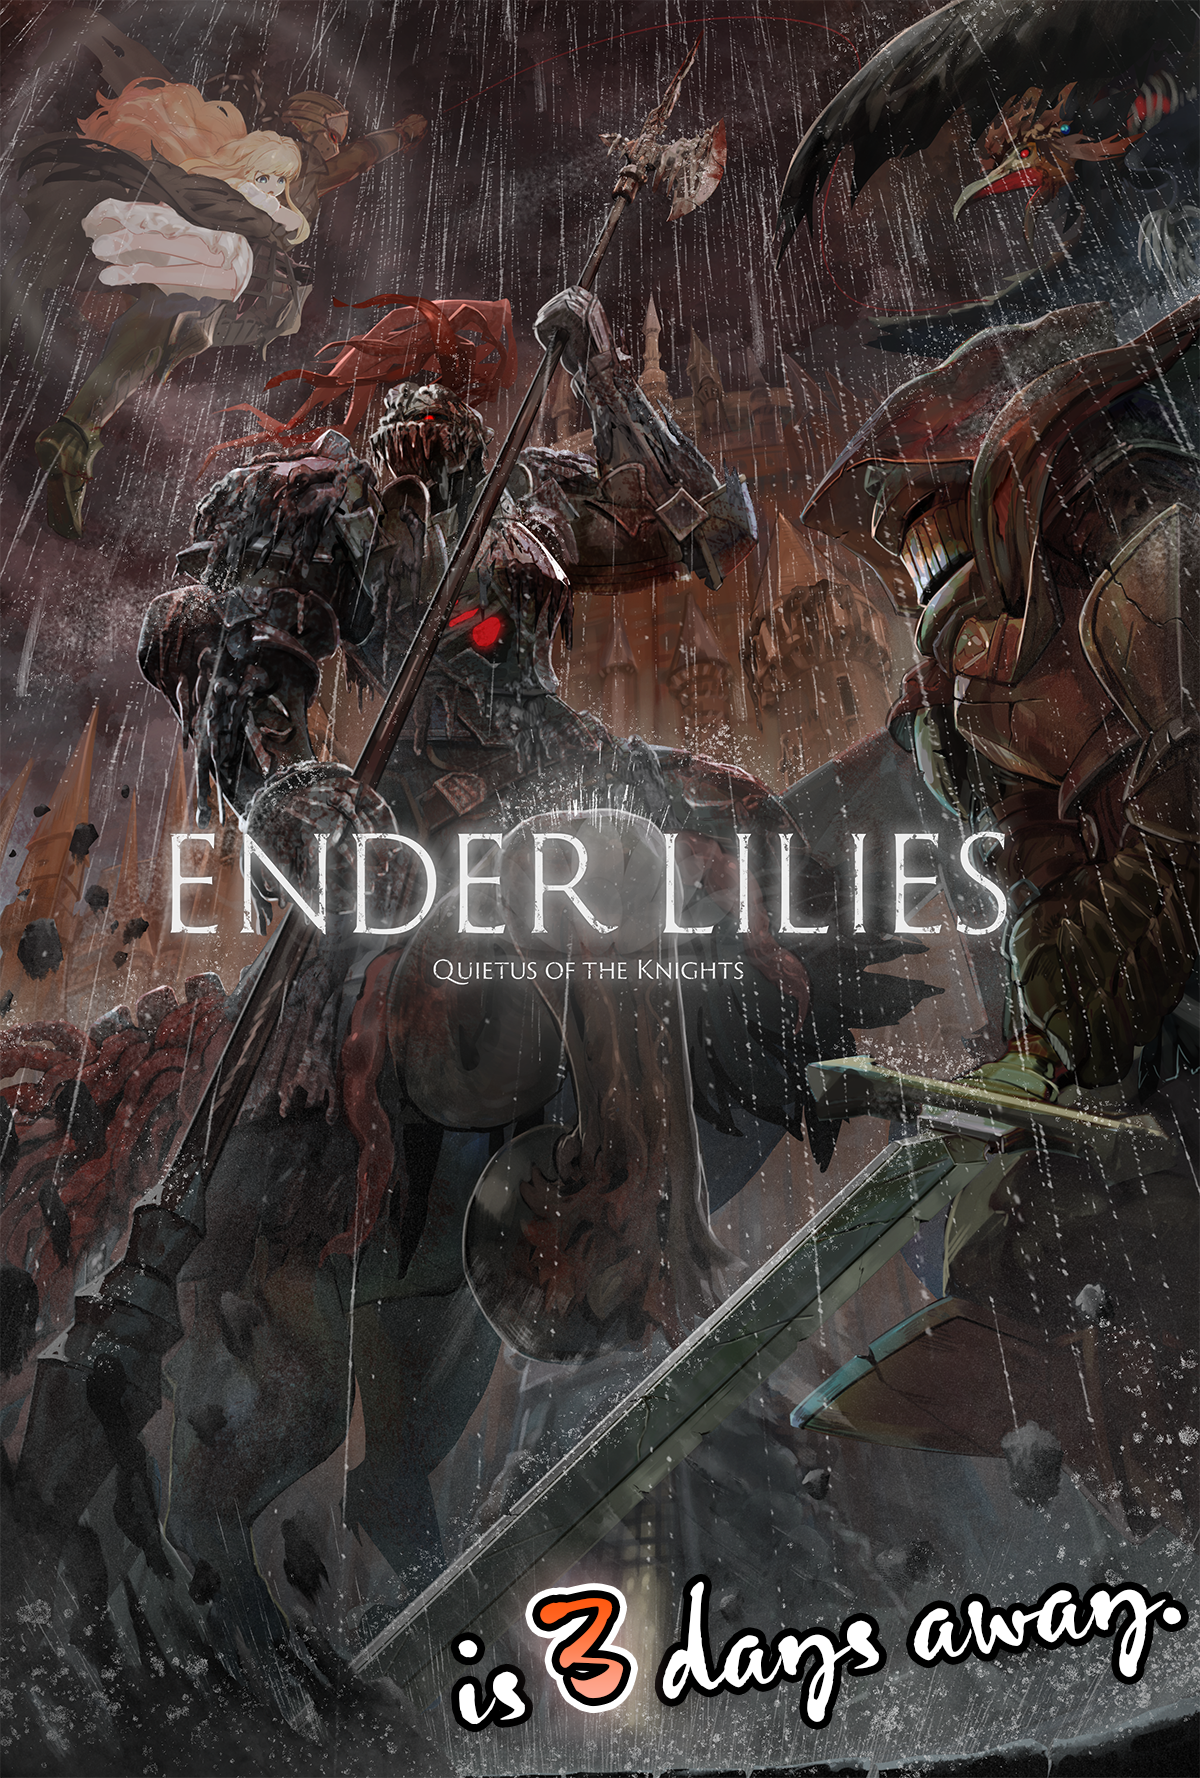 ENDER LILIES: Quietus of the Knights Original Soundtrack on Steam